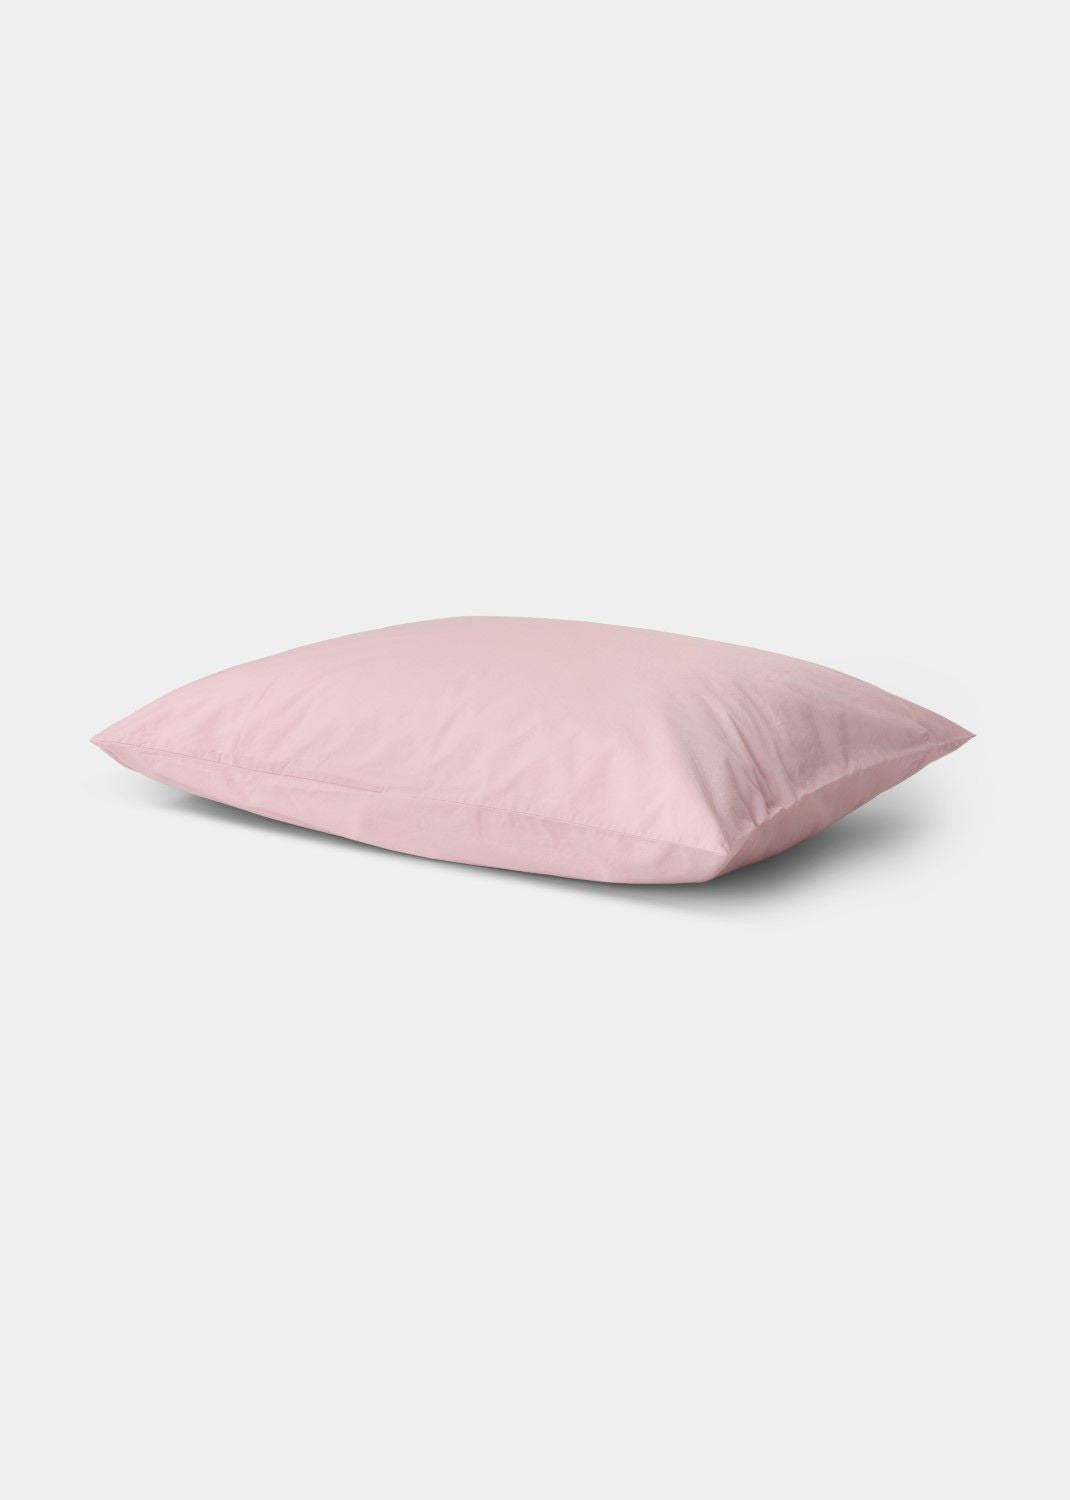 Sekan Studio Cotton Percale Pillow Covers - Pink